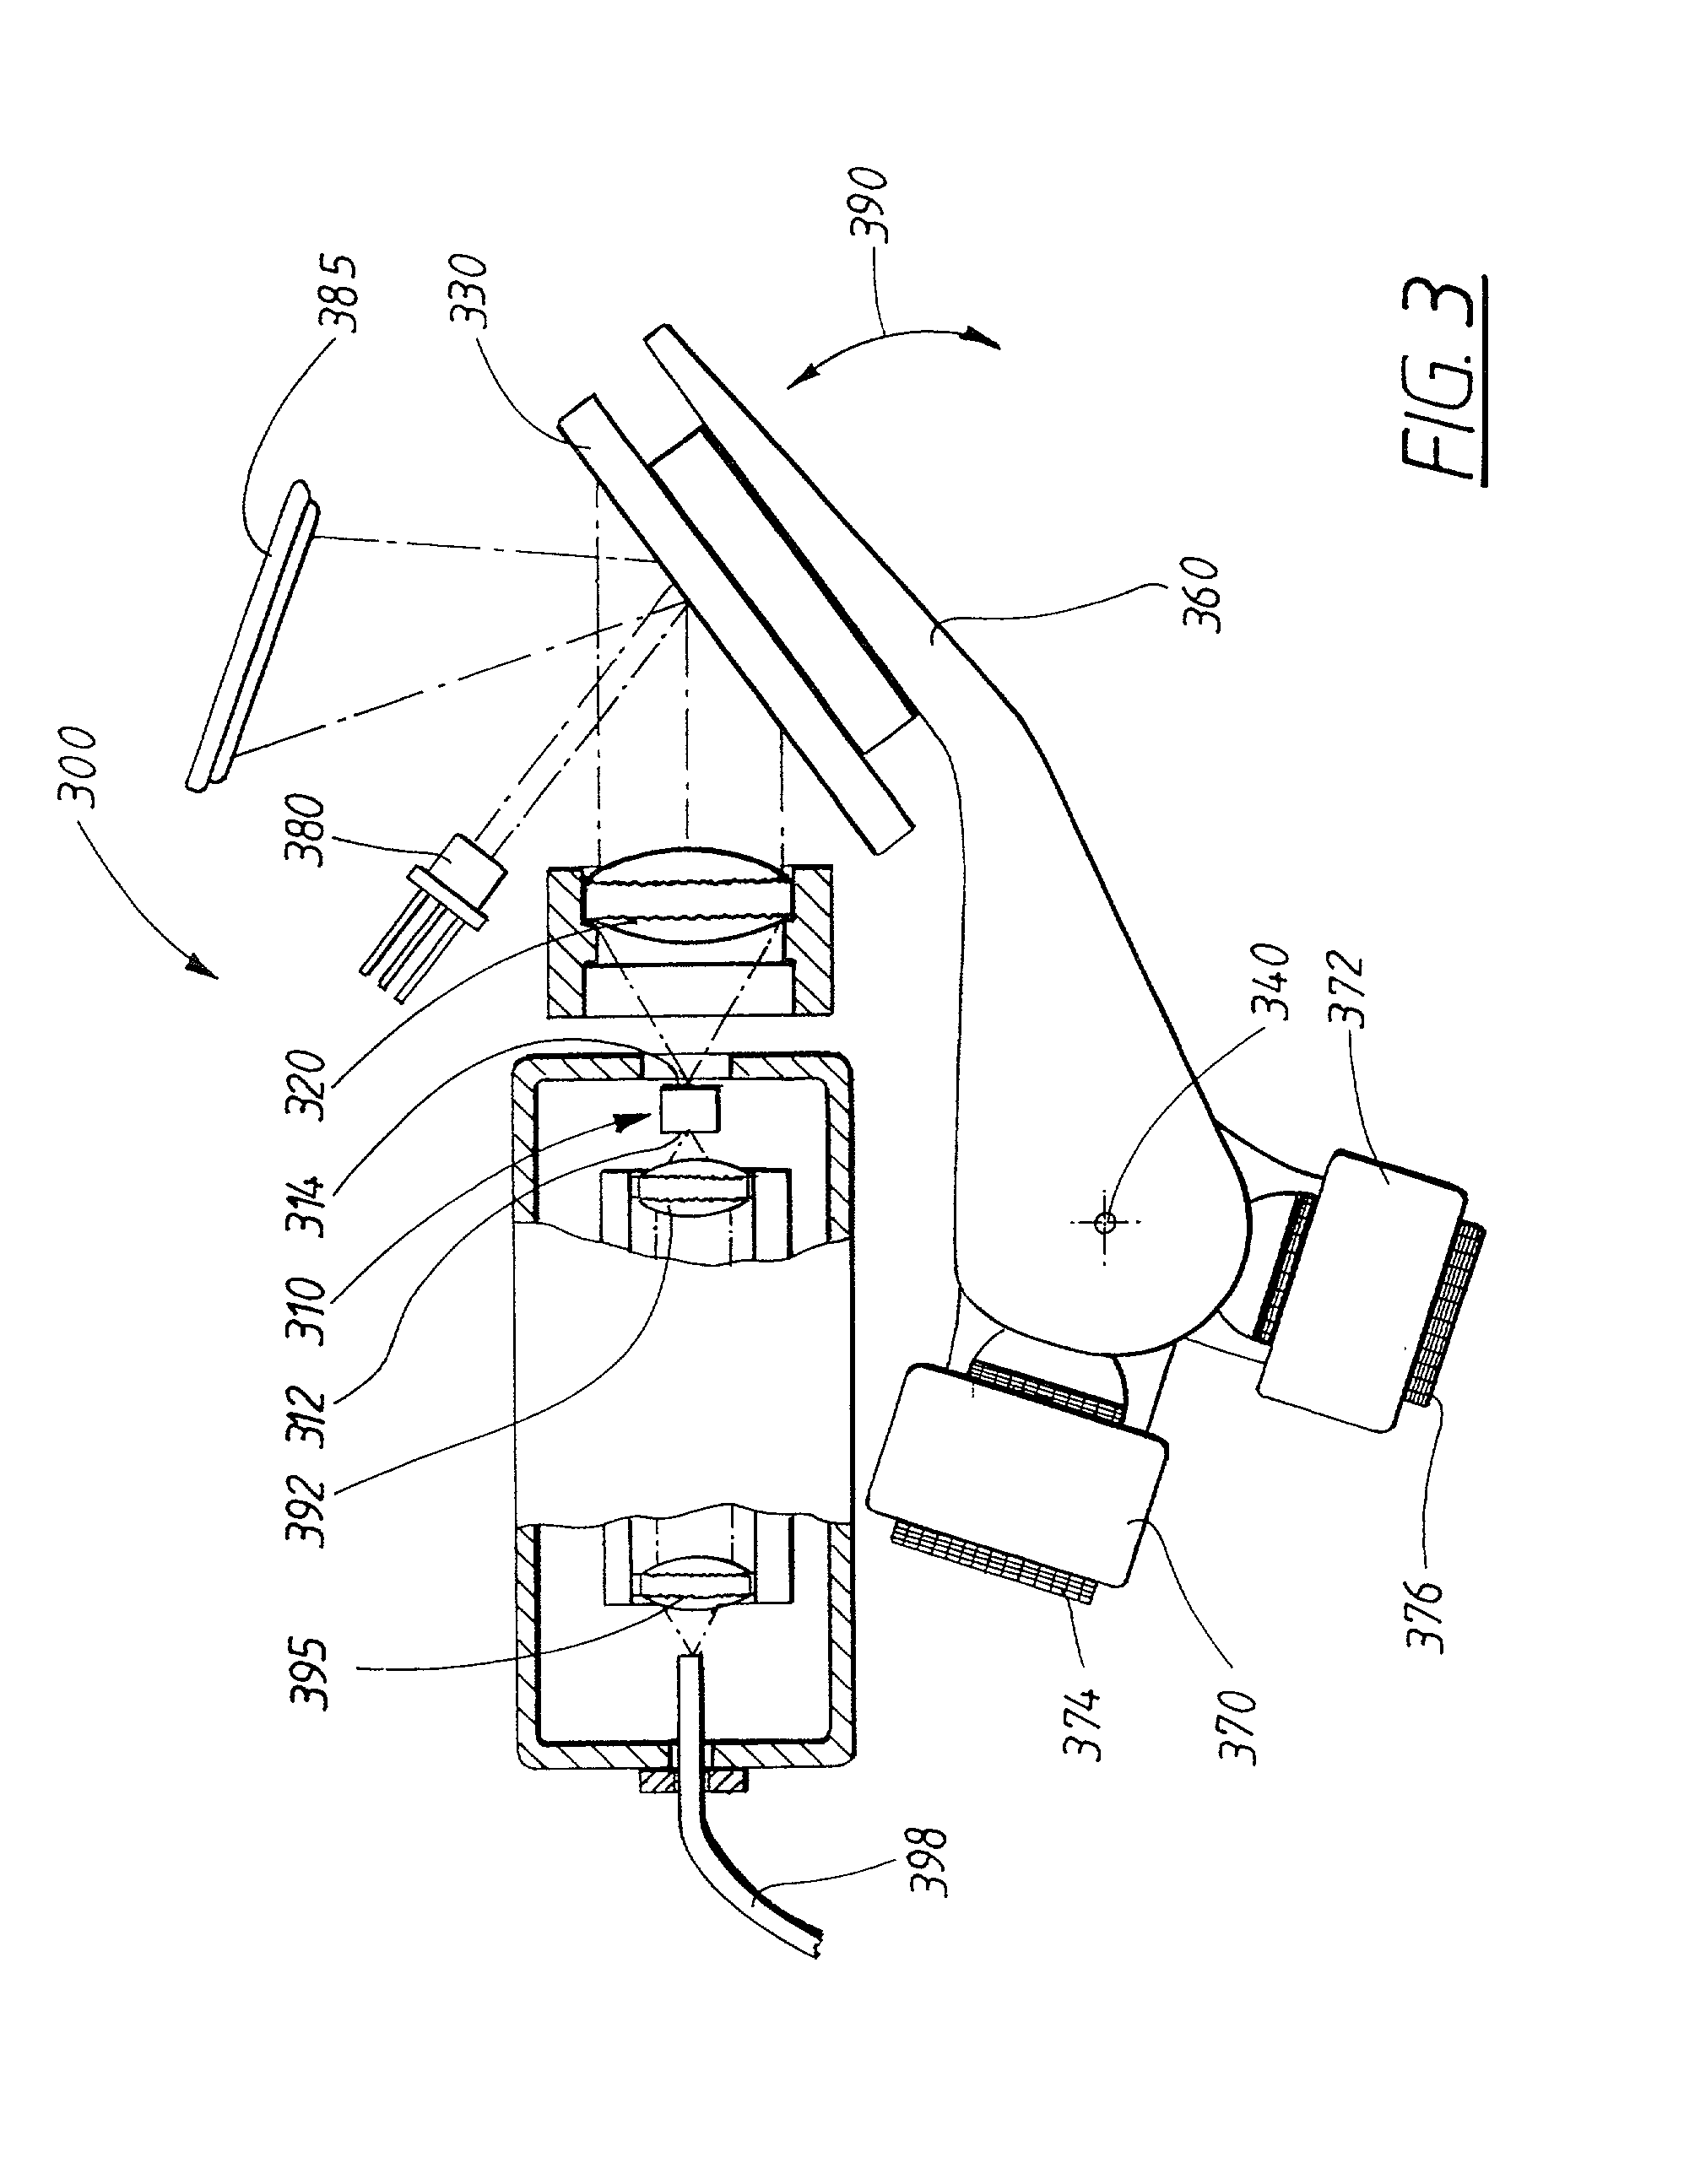 Device and method for tuning the wavelength of the light in an external cavity laser